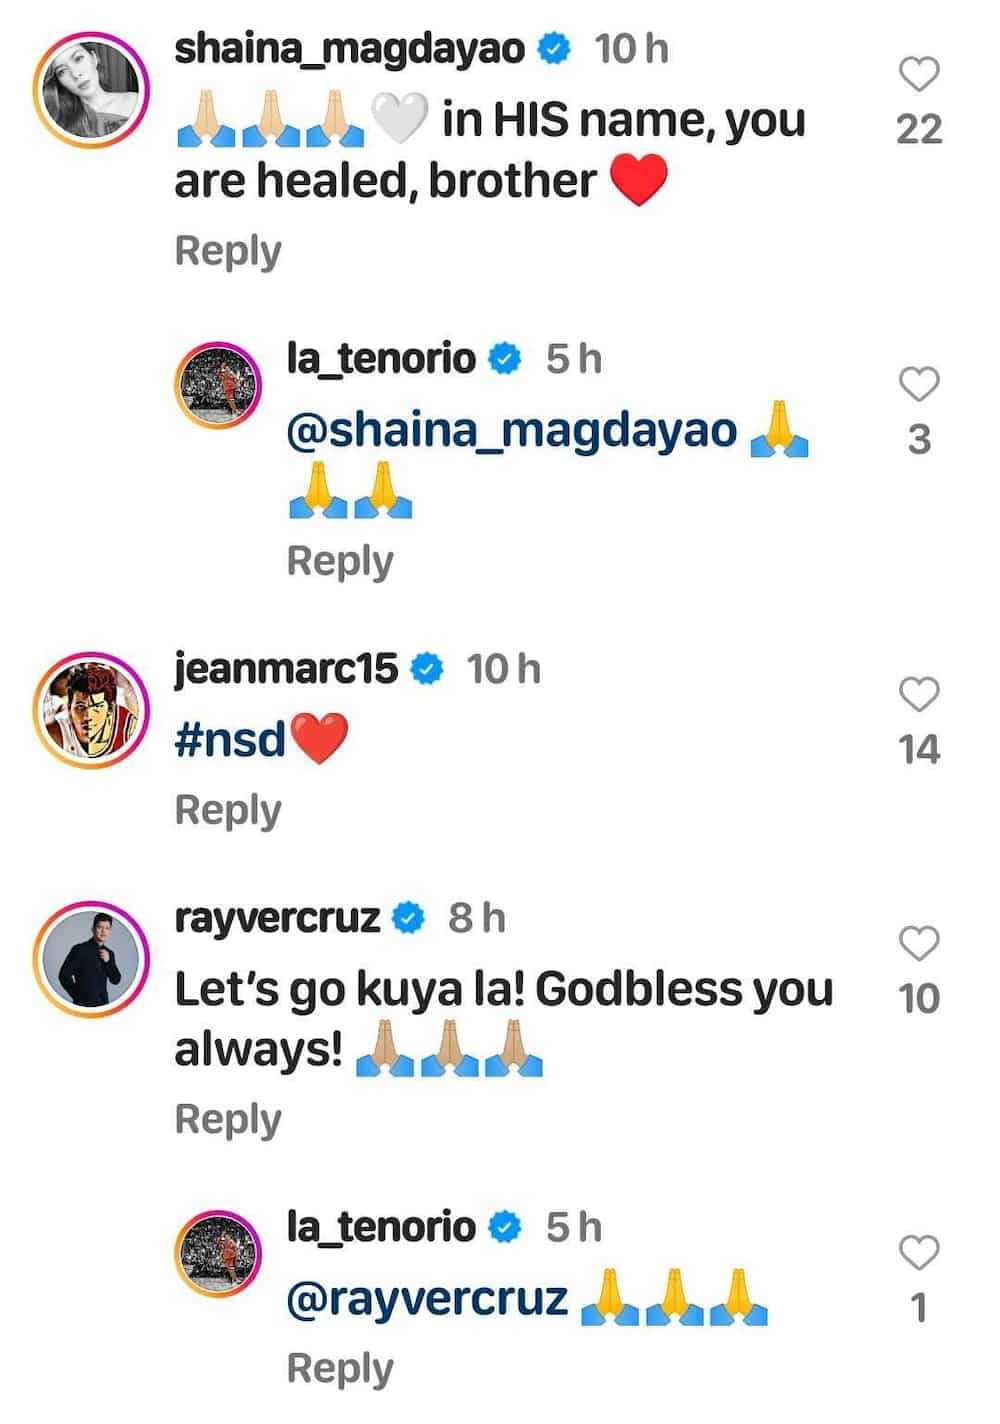 LA Tenorio's "road to recovery" post gains uplifting comments from celebrities